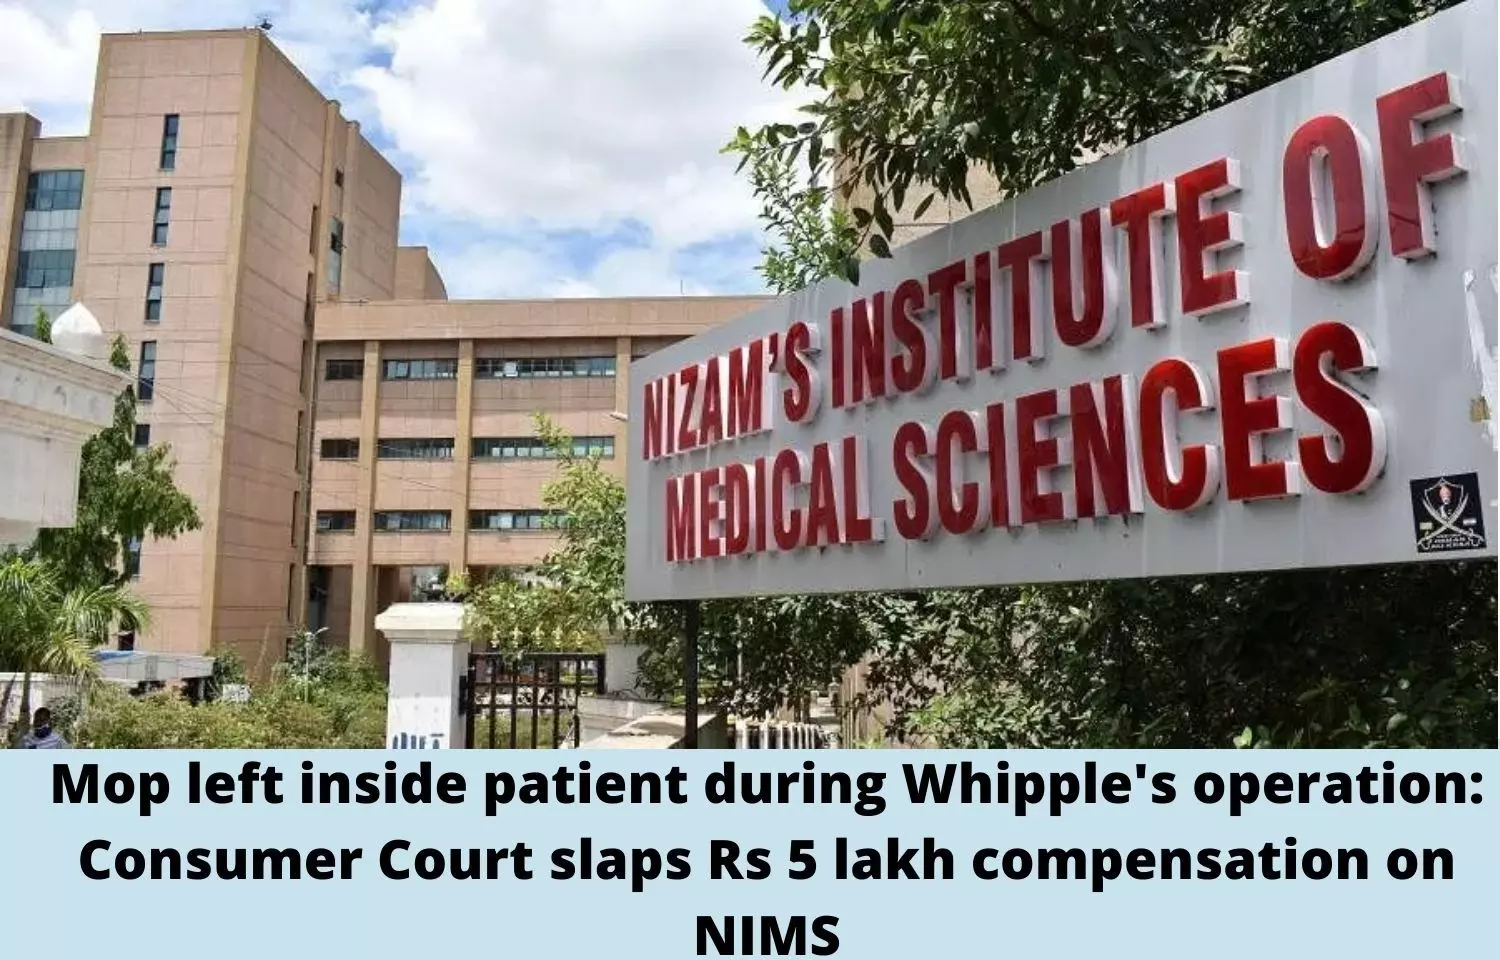 Mop left inside patient during Whipples operation: Consumer Court slaps Rs 5 lakh compensation on NIMS